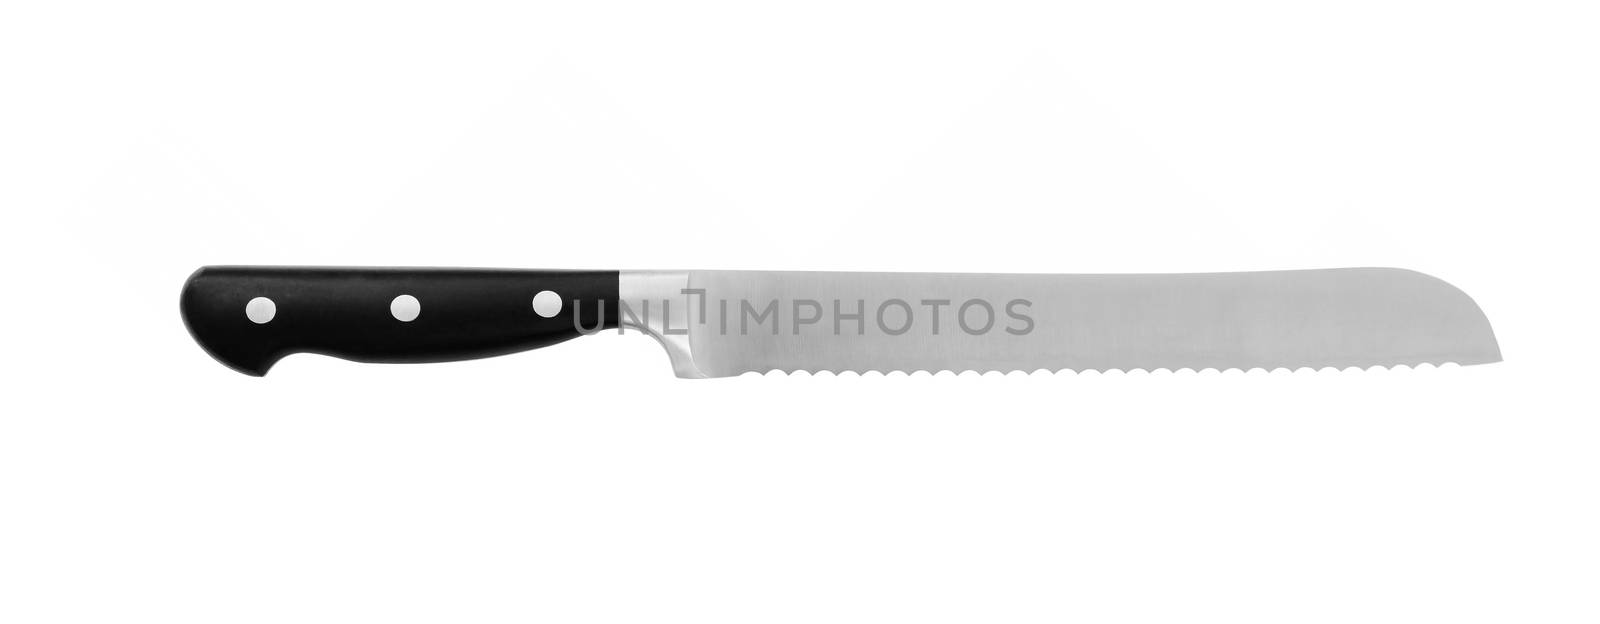 Kitchen knife isolated on white background by ozaiachin